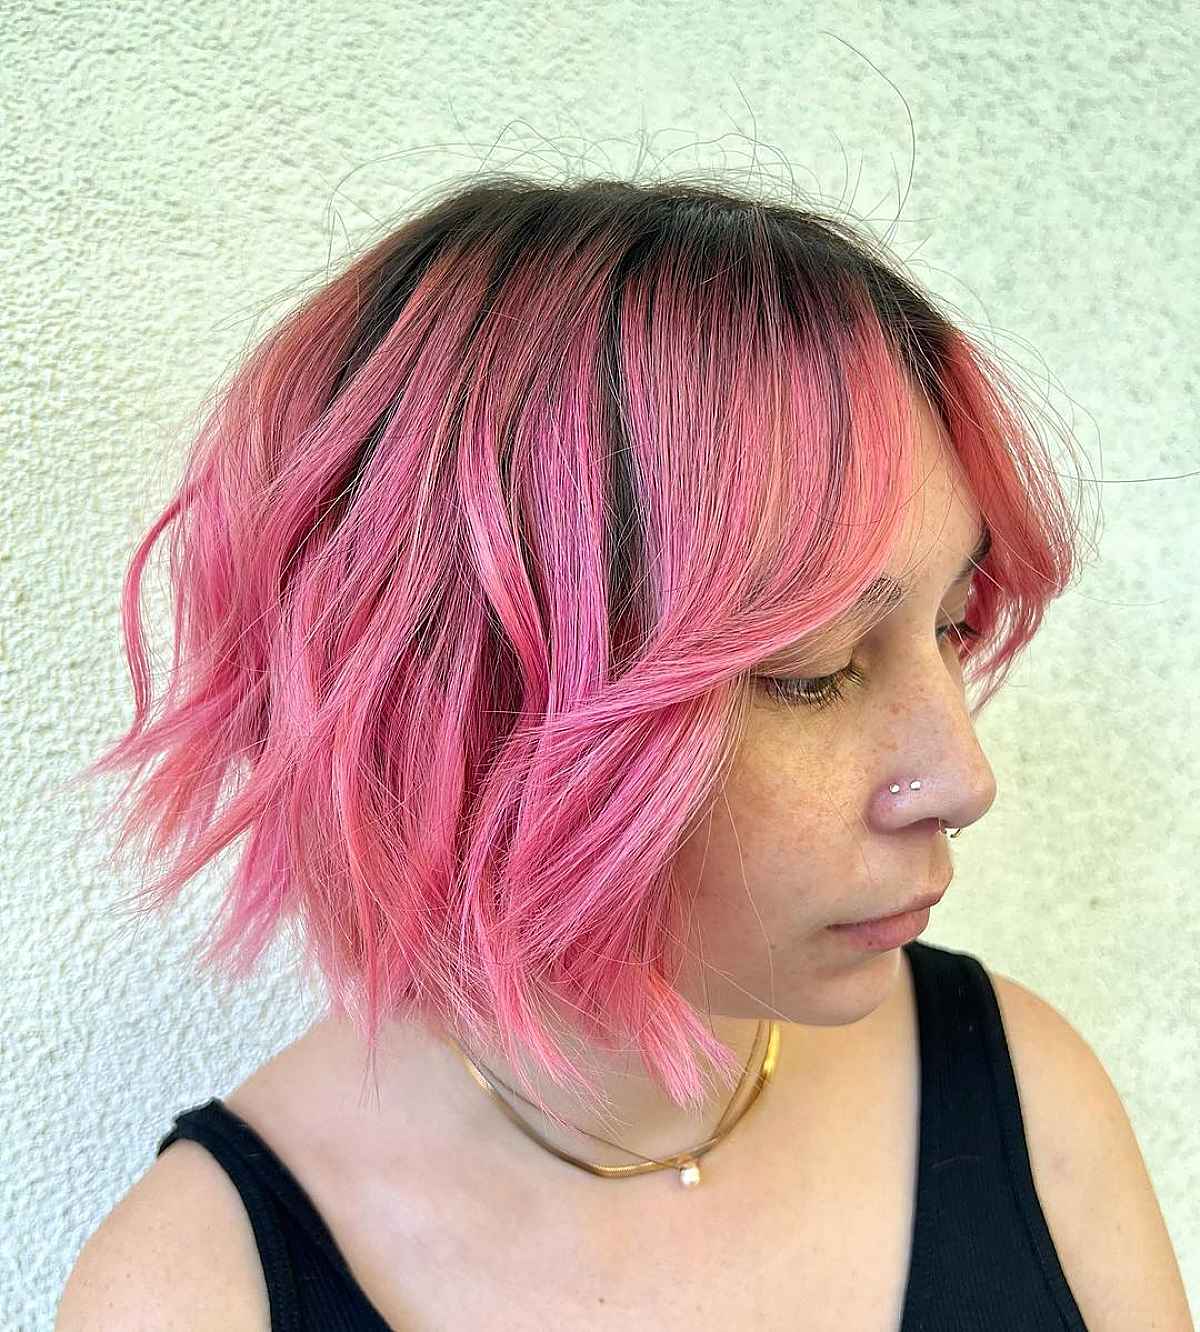 Pink Short Hair with Middle-Parted Bangs